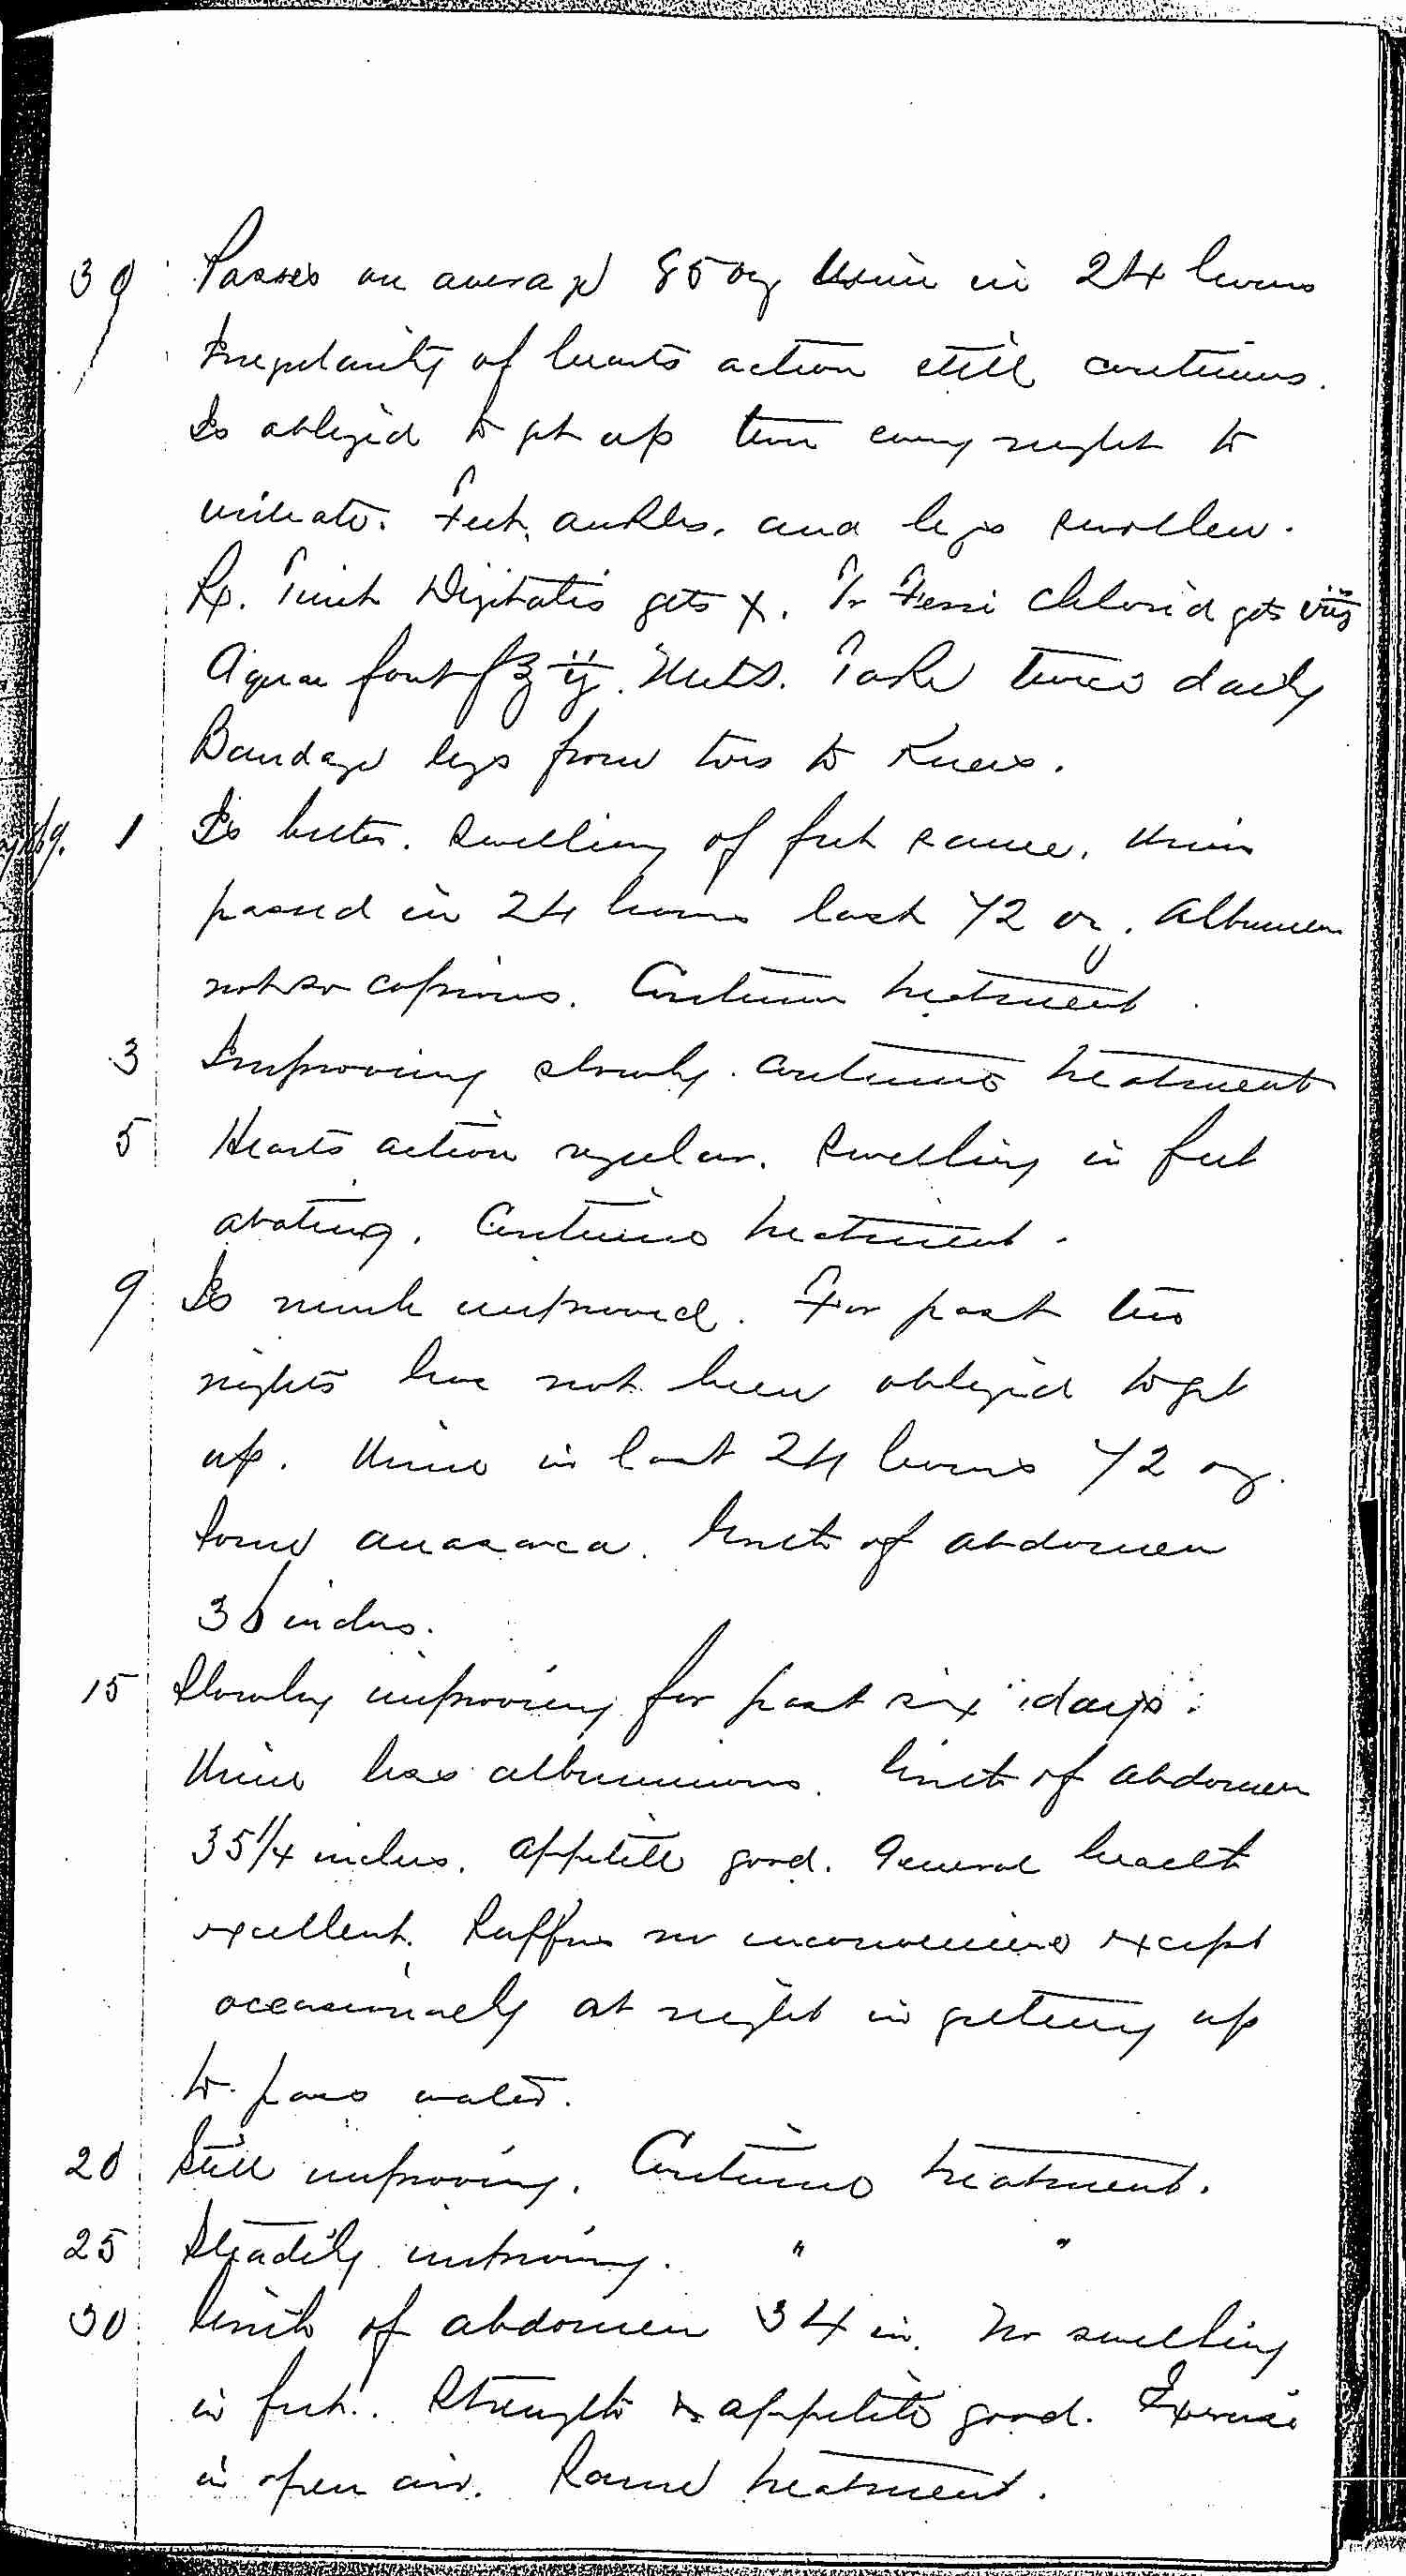 Entry for Bernard Coyne (page 11 of 13) in the log Hospital Tickets and Case Papers - Naval Hospital - Washington, D.C. - 1868-69